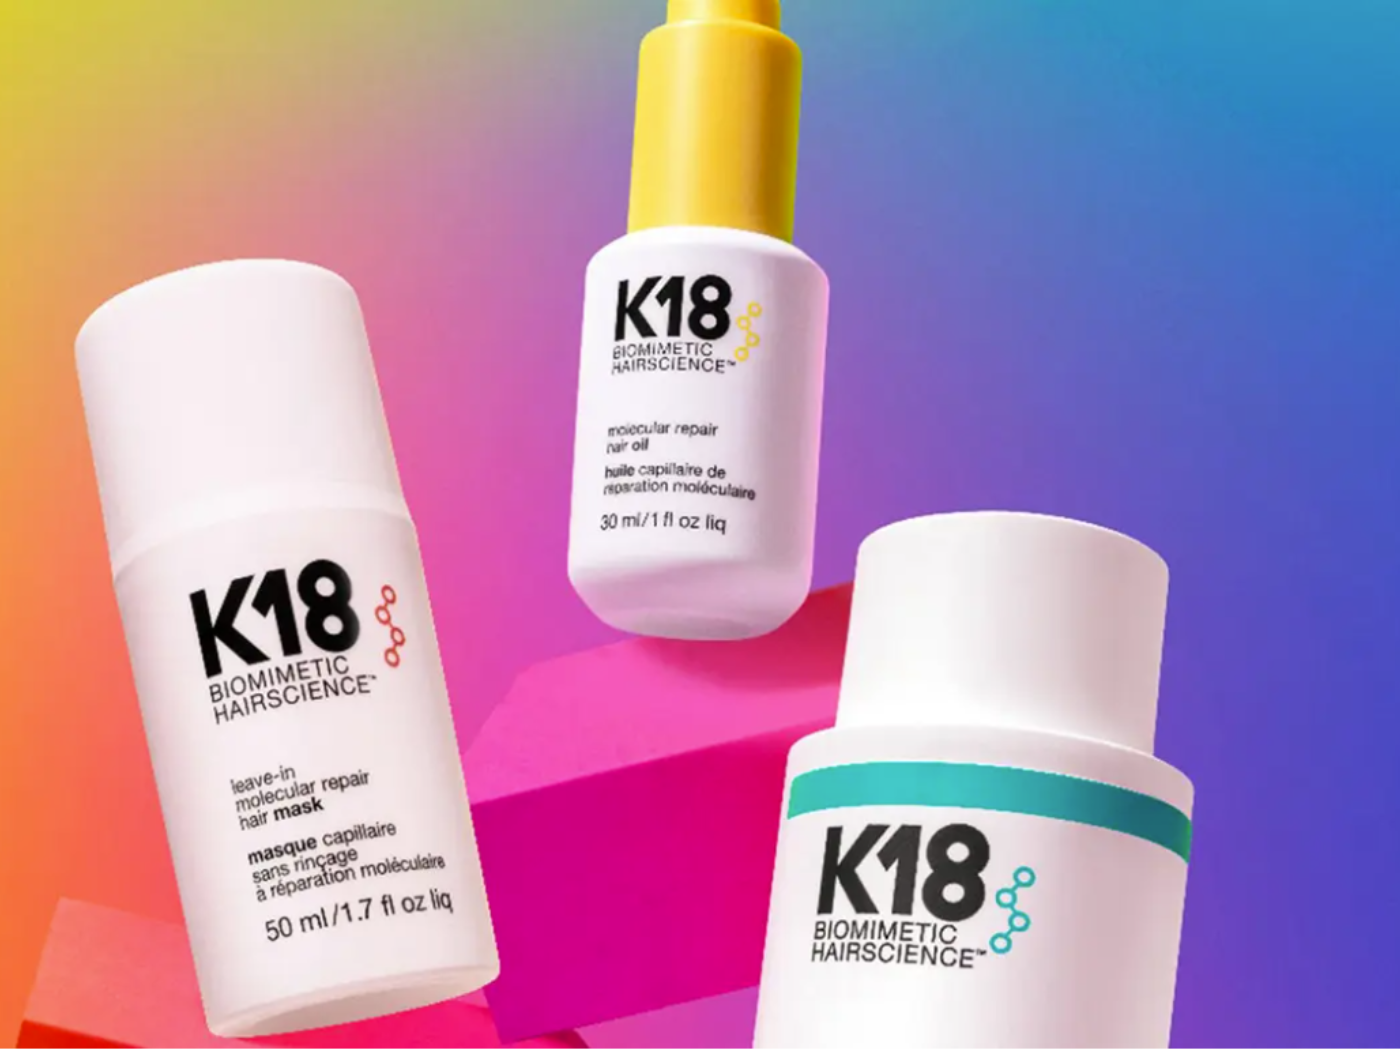 Unilever Acquires K18 Biotech Hair Care Brand